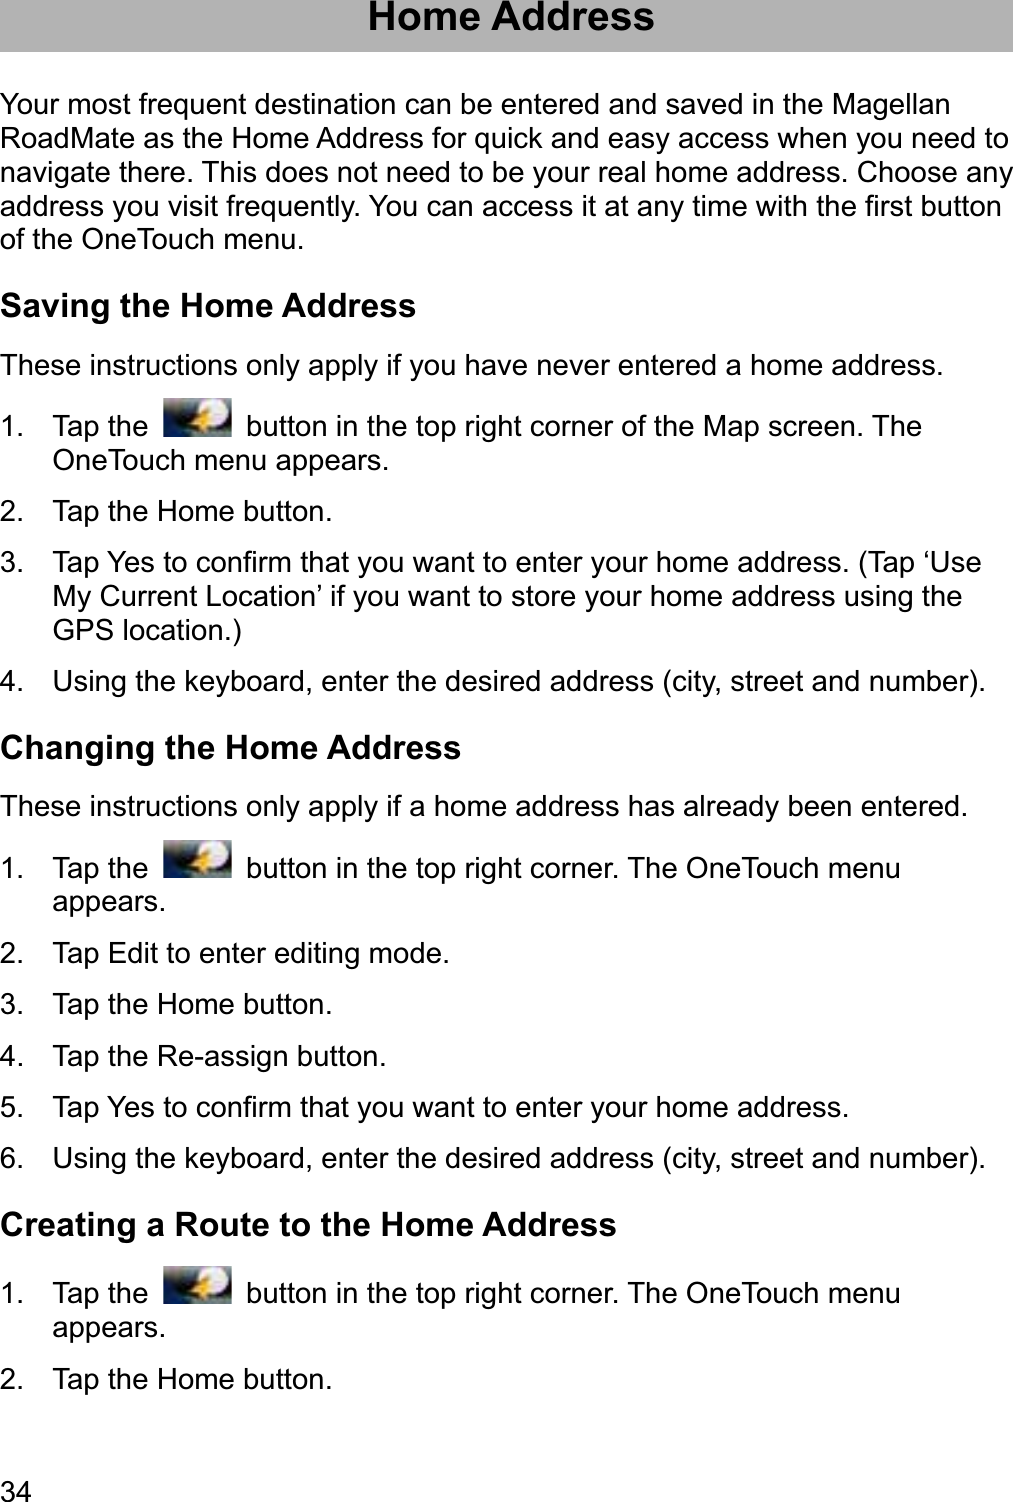 34Home Address Your most frequent destination can be entered and saved in the Magellan RoadMate as the Home Address for quick and easy access when you need to navigate there. This does not need to be your real home address. Choose any address you visit frequently. You can access it at any time with the first button of the OneTouch menu. Saving the Home Address These instructions only apply if you have never entered a home address. 1. Tap the    button in the top right corner of the Map screen. The OneTouch menu appears. 2.  Tap the Home button. 3.  Tap Yes to confirm that you want to enter your home address. (Tap ‘Use My Current Location’ if you want to store your home address using the GPS location.) 4.  Using the keyboard, enter the desired address (city, street and number). Changing the Home Address These instructions only apply if a home address has already been entered. 1. Tap the    button in the top right corner. The OneTouch menu appears. 2.  Tap Edit to enter editing mode. 3.  Tap the Home button. 4.  Tap the Re-assign button. 5.  Tap Yes to confirm that you want to enter your home address. 6.  Using the keyboard, enter the desired address (city, street and number). Creating a Route to the Home Address 1. Tap the    button in the top right corner. The OneTouch menu appears. 2.  Tap the Home button. 